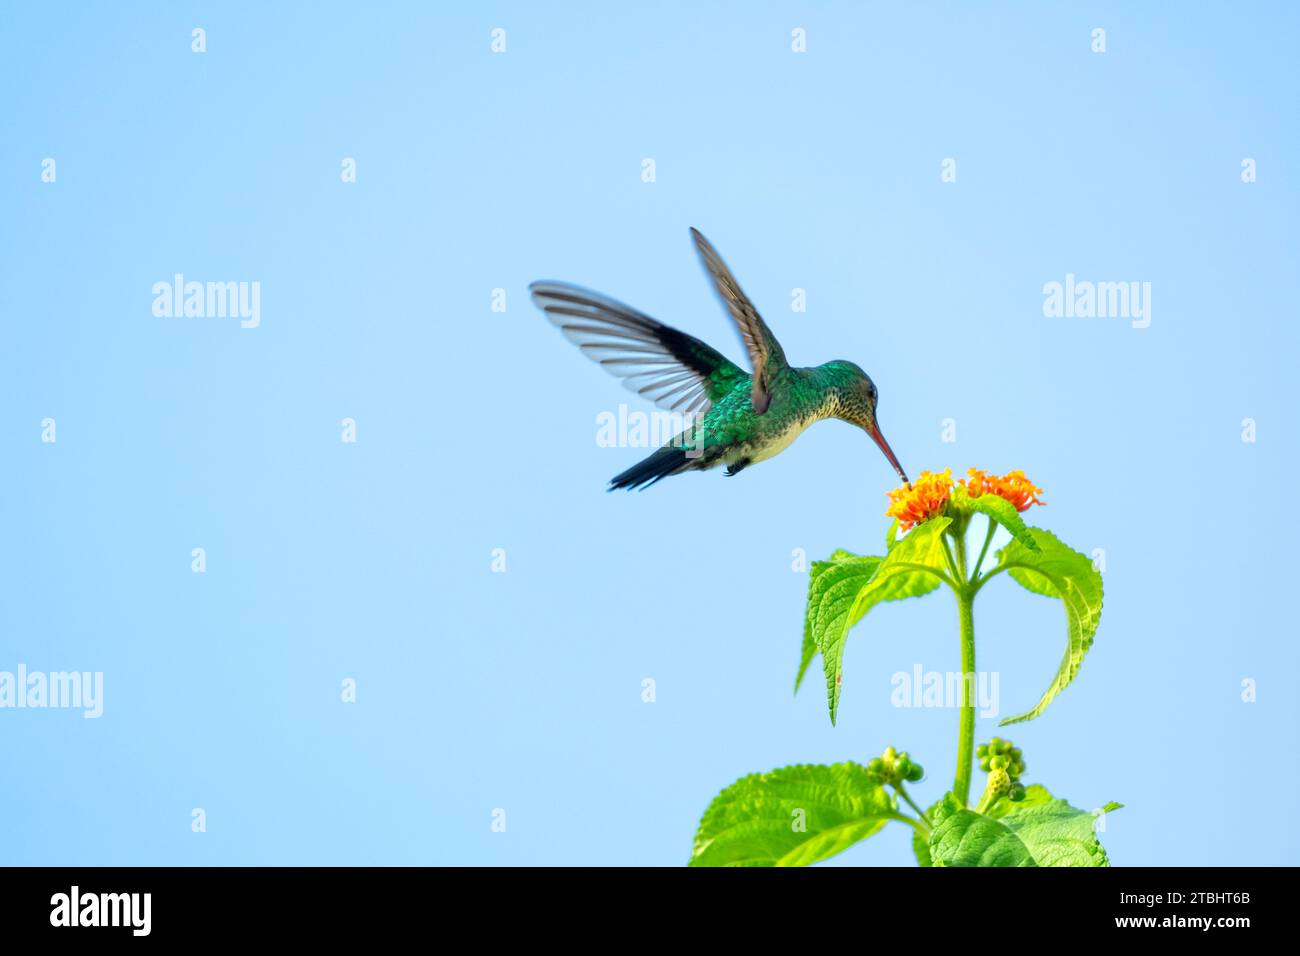 A Blue-chinned Sapphire hummingbird, Chlorestes Notata, pollinating orange flowers isolated in the blue sky Stock Photo